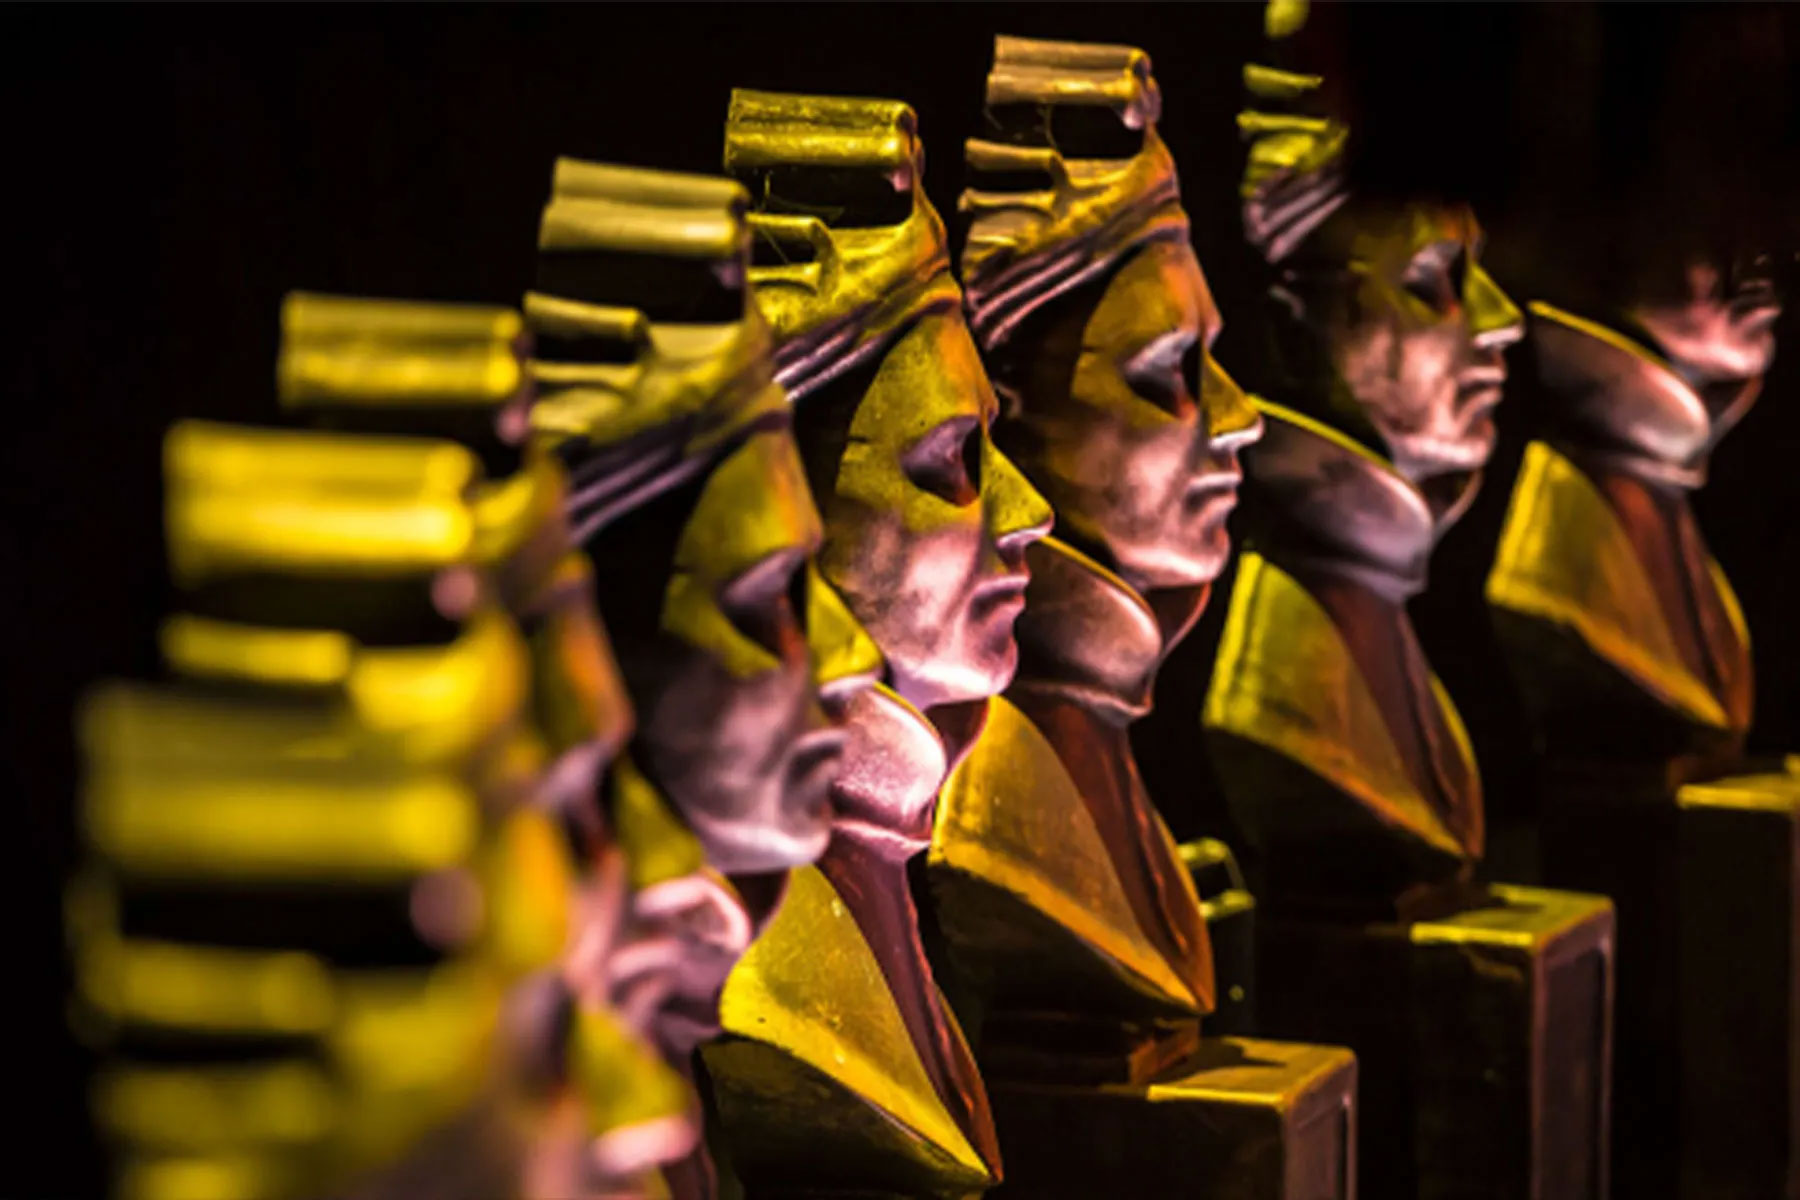 A row of Olivier Awards statues